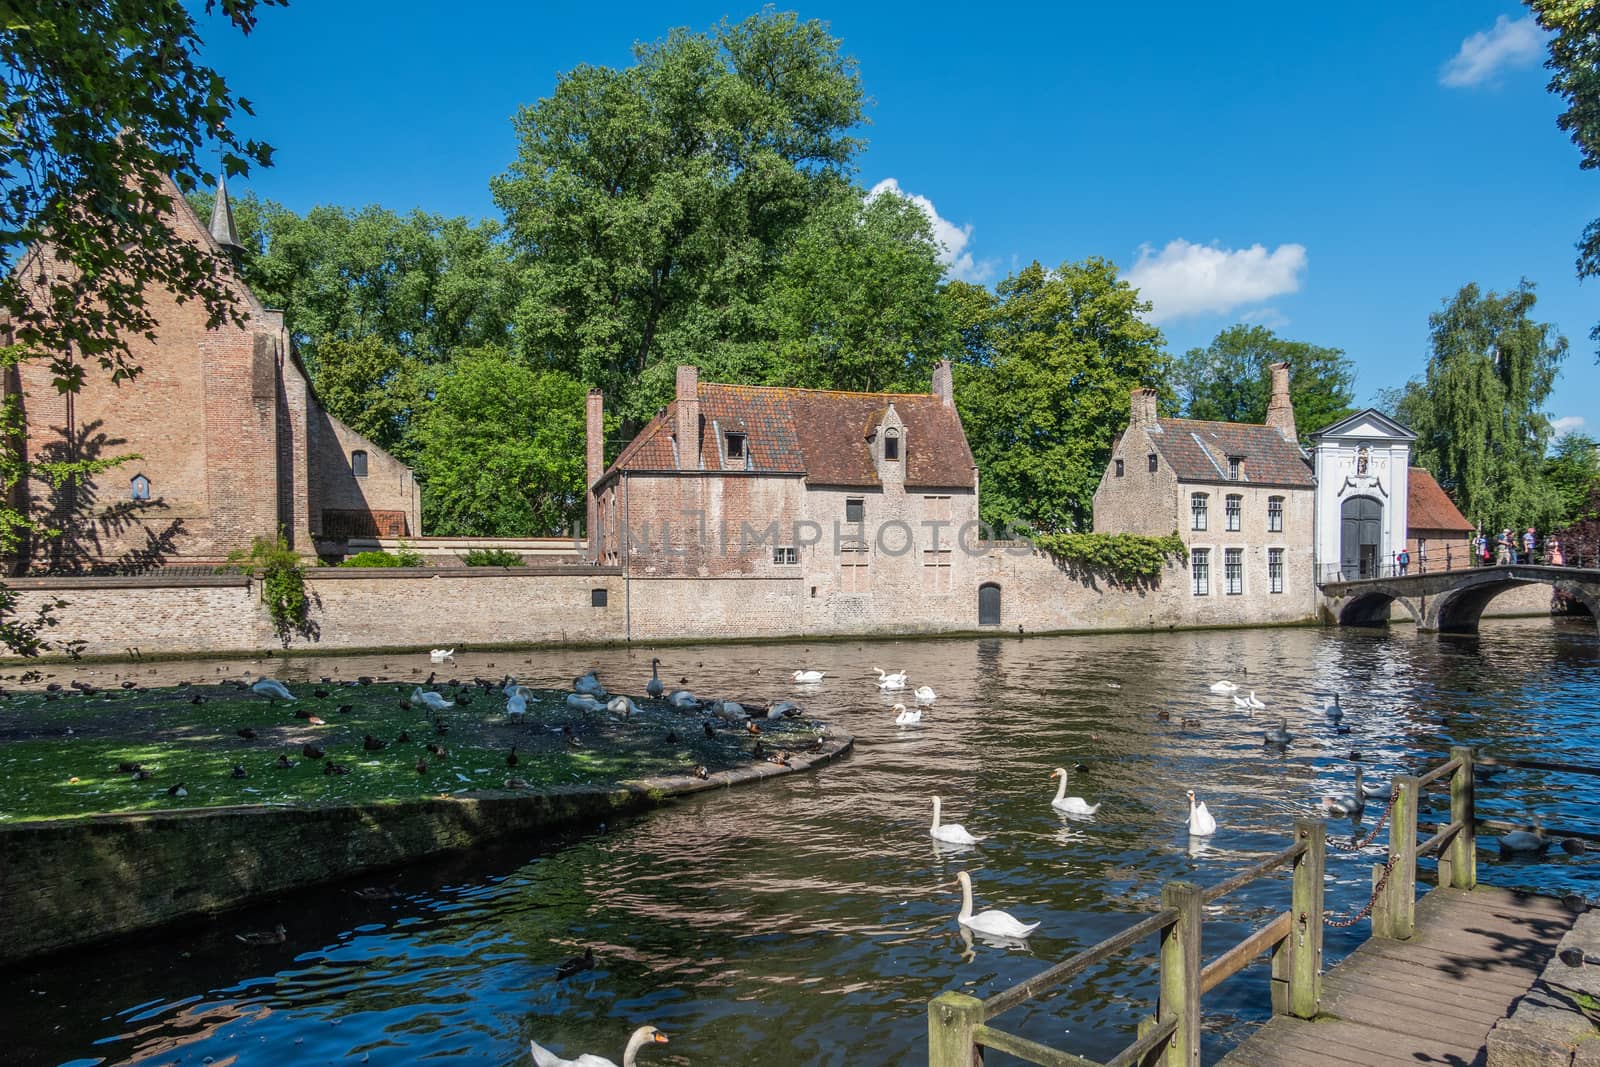 Bruges, Flanders, Belgium -  June 17, 2019: Brown brick stone outer facade and wall of Beguinage. Dark canal with white swans in front. Blue sky and green foliage.